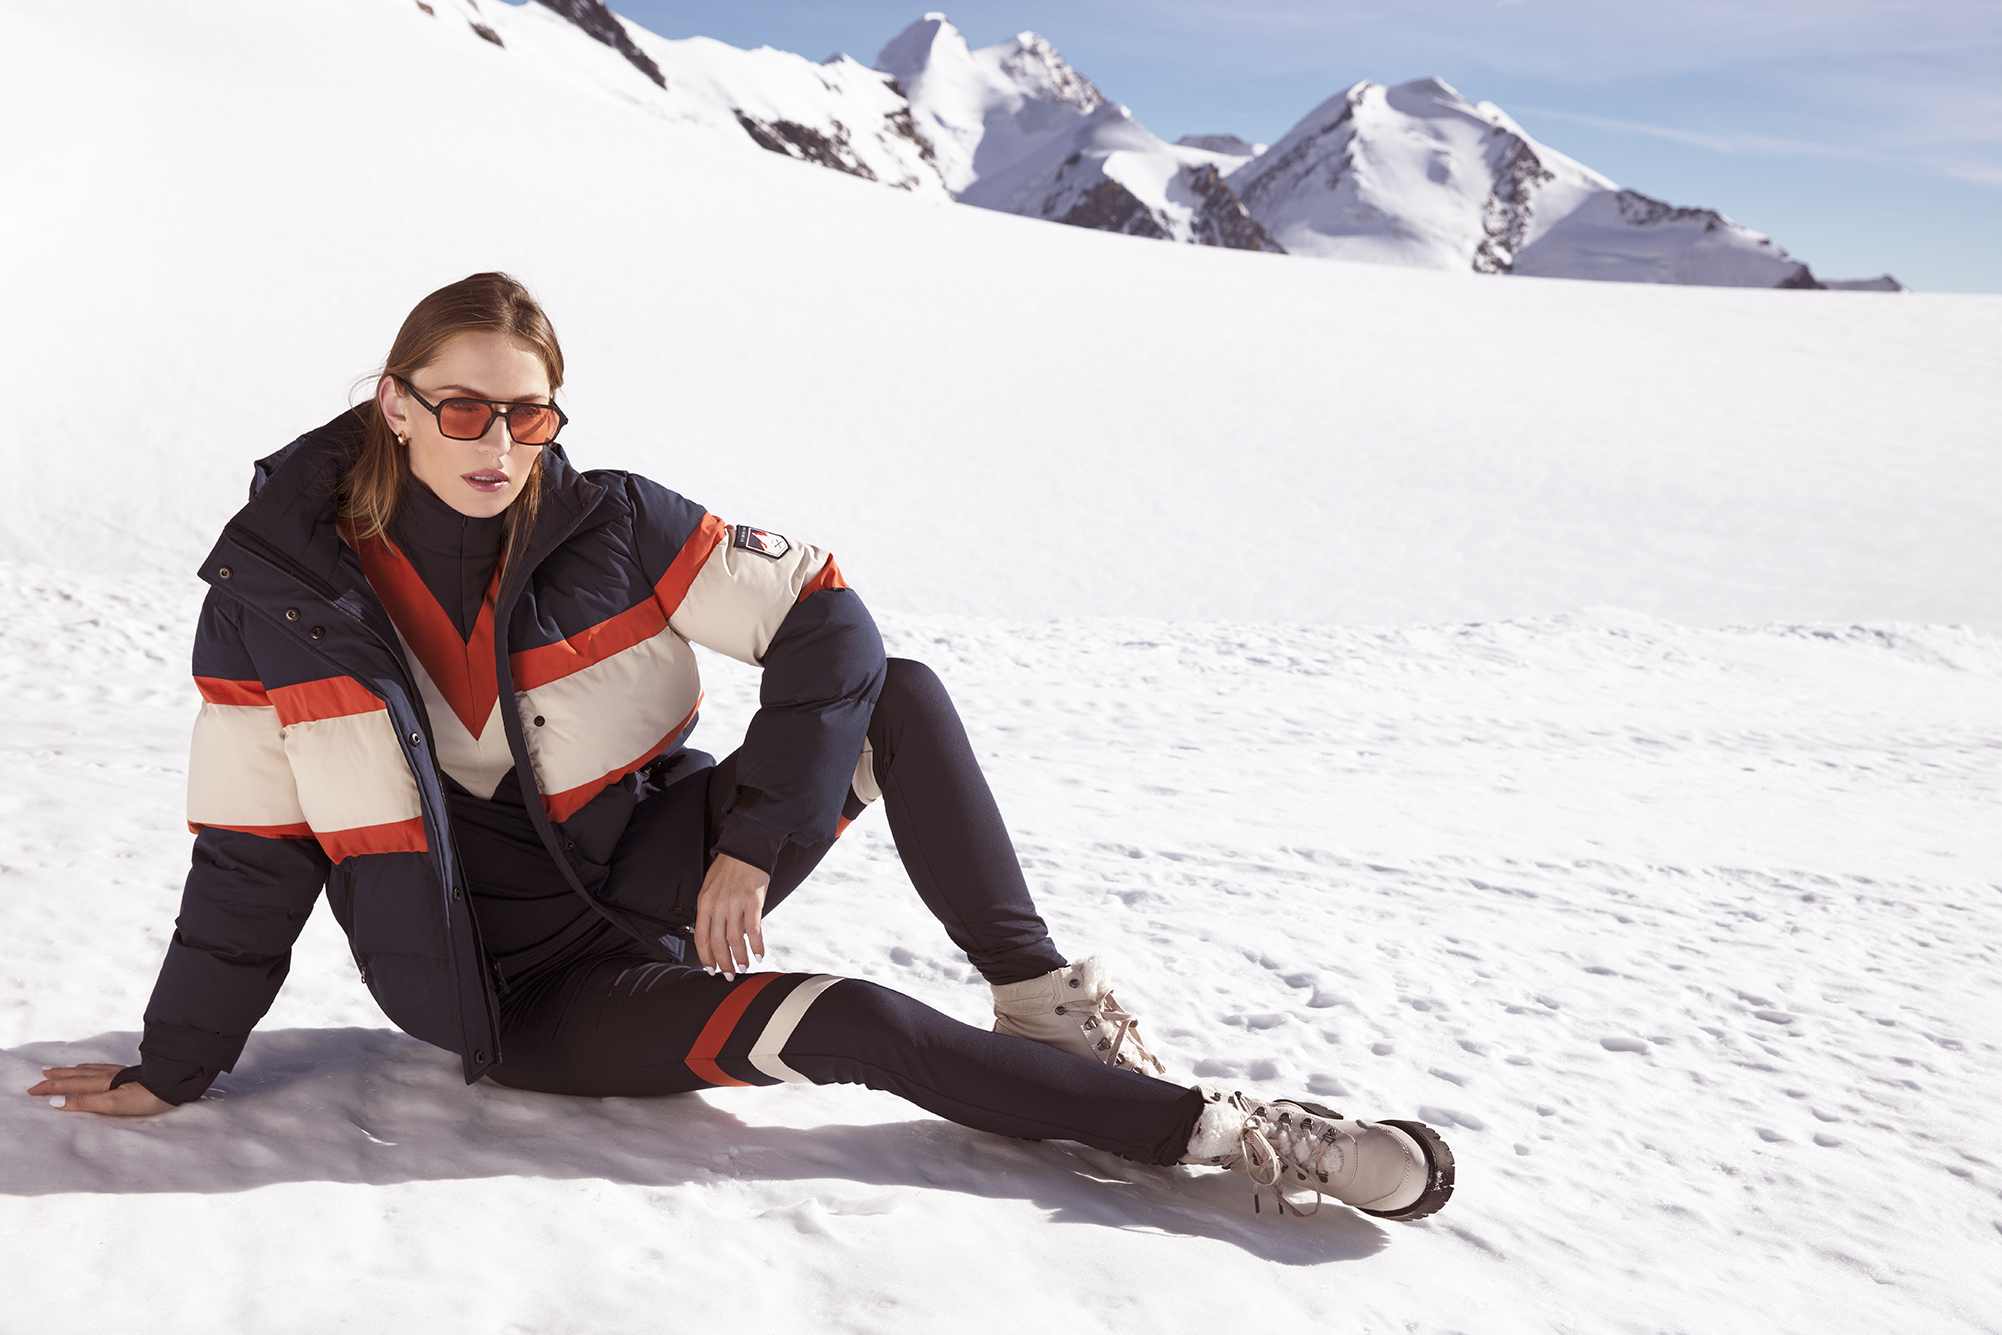 Why The Ski Capsule from By Malina is the ultimate ski collection you need for winter 21/22. 10